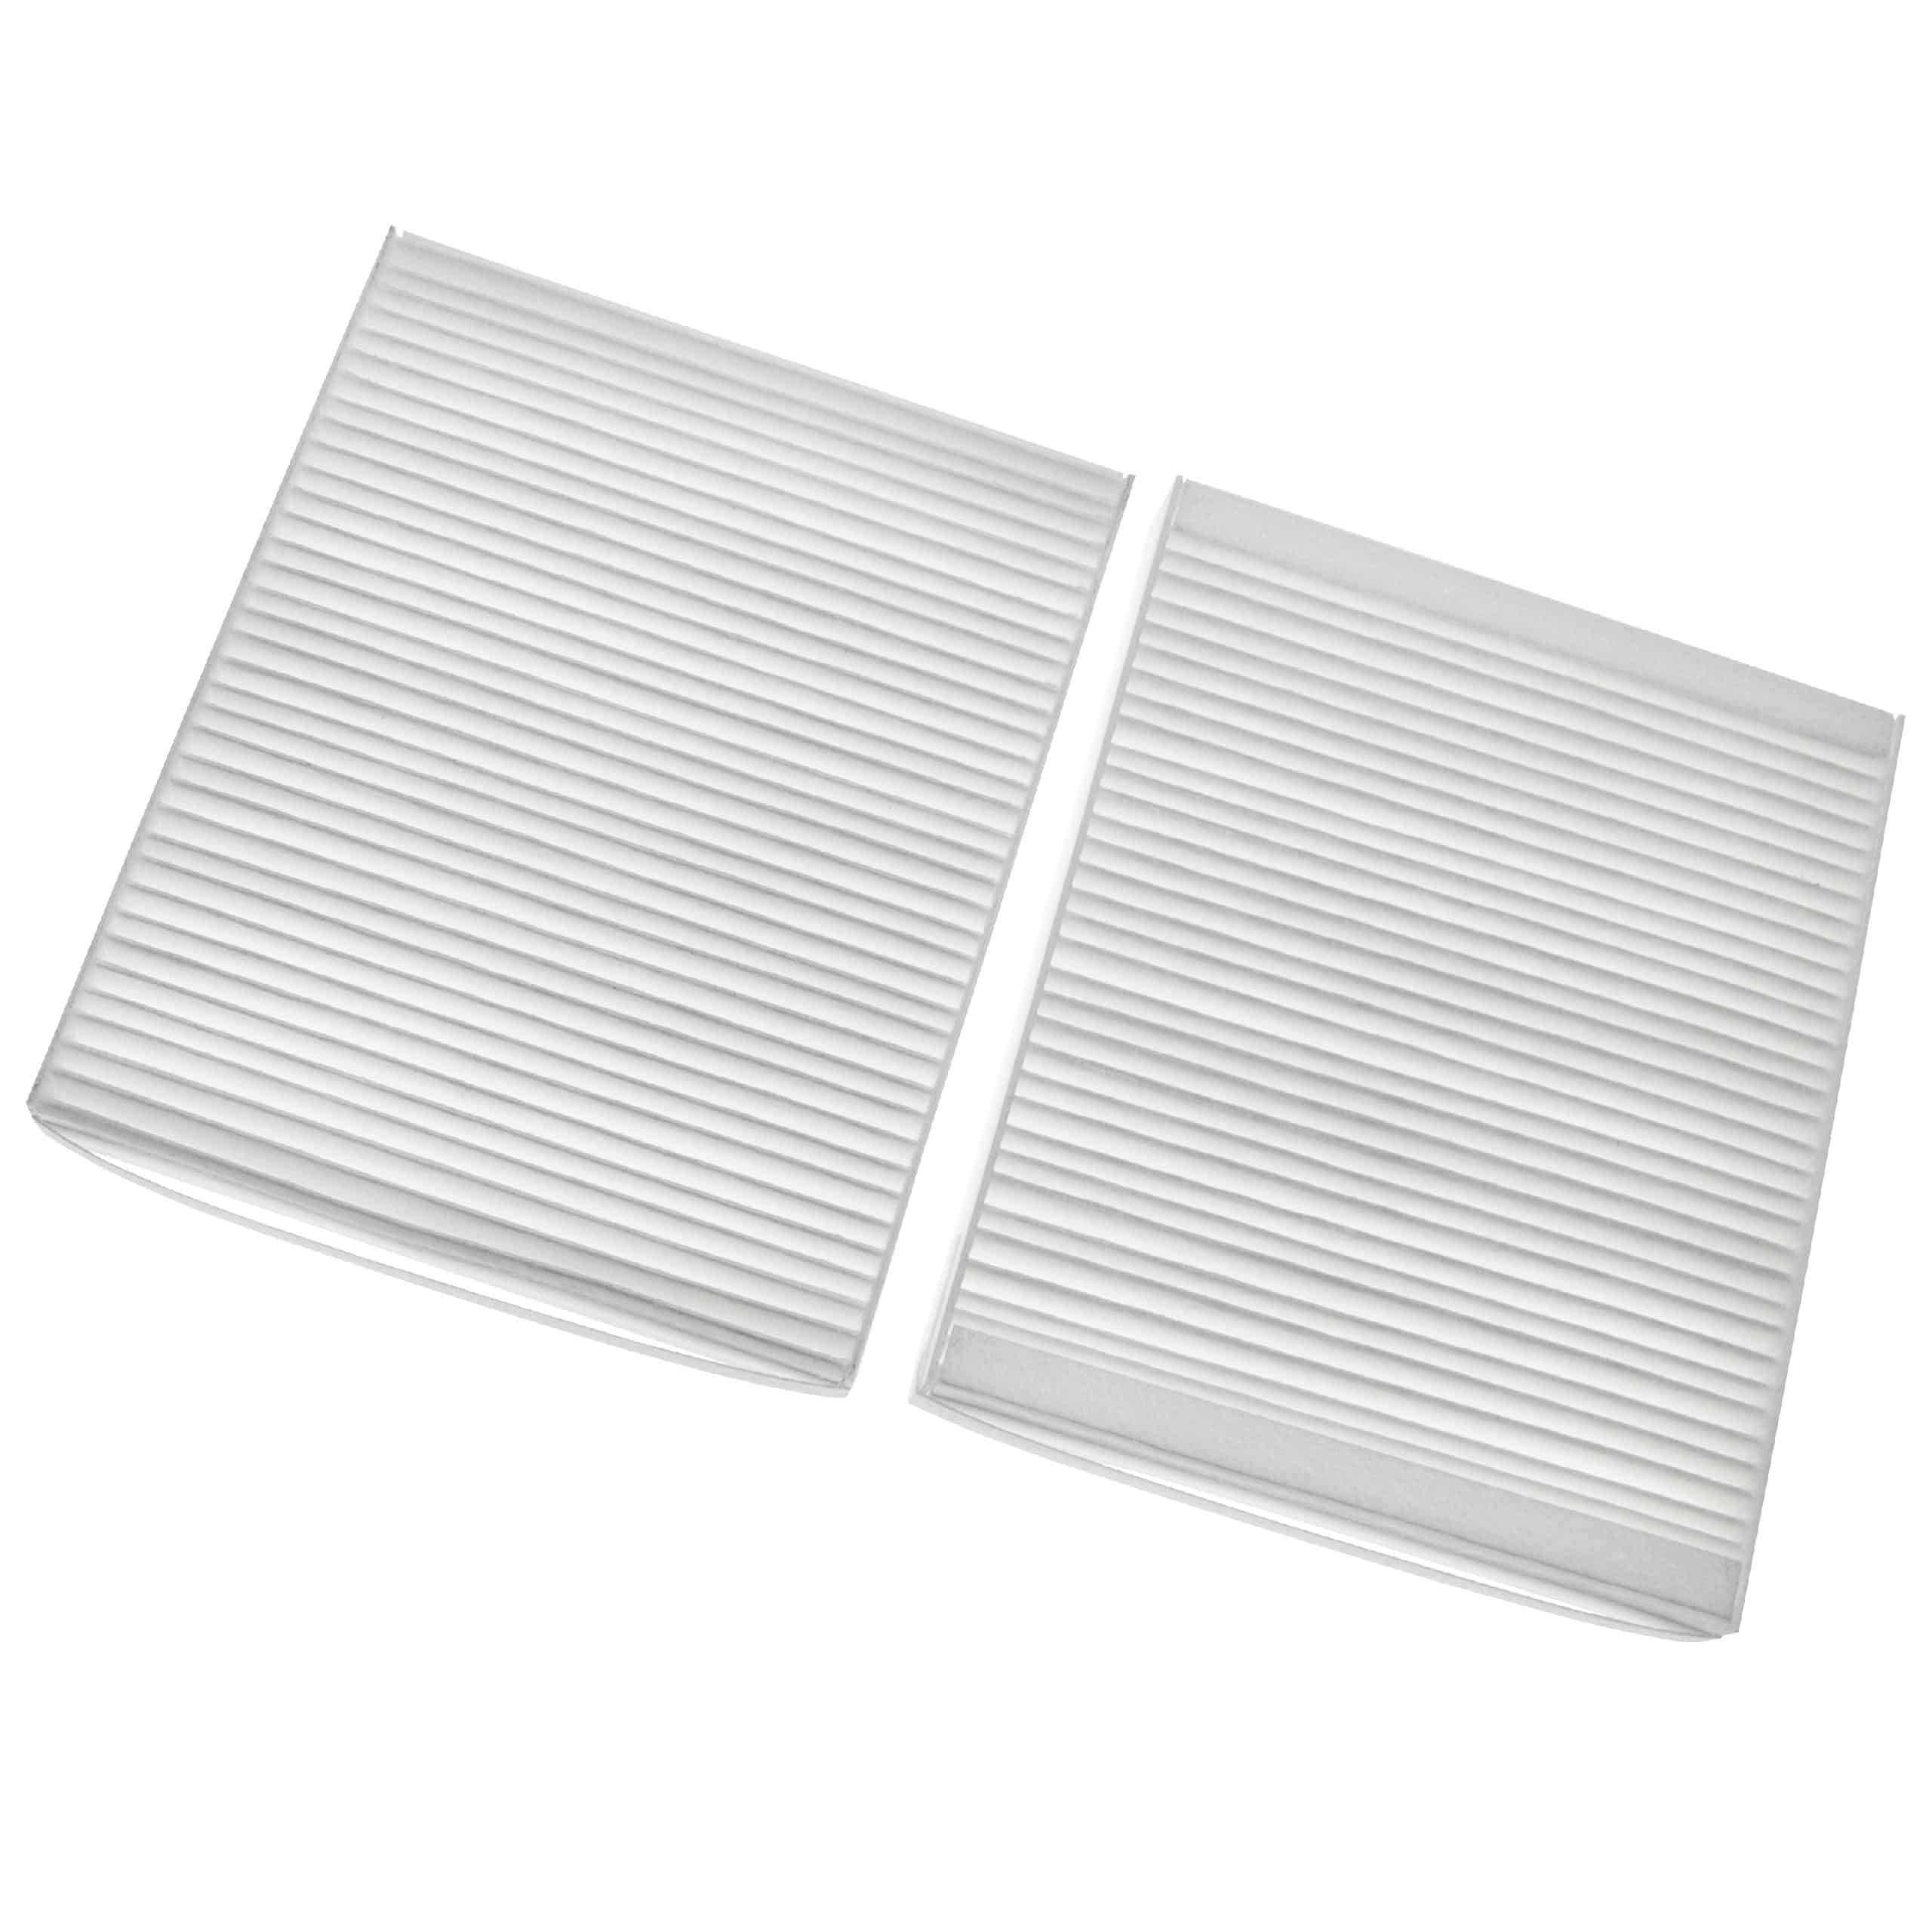 1x exhaust filter / 1x intake filter F7 replaces Lunos 040110, 040 110 for Lunos Ventilator